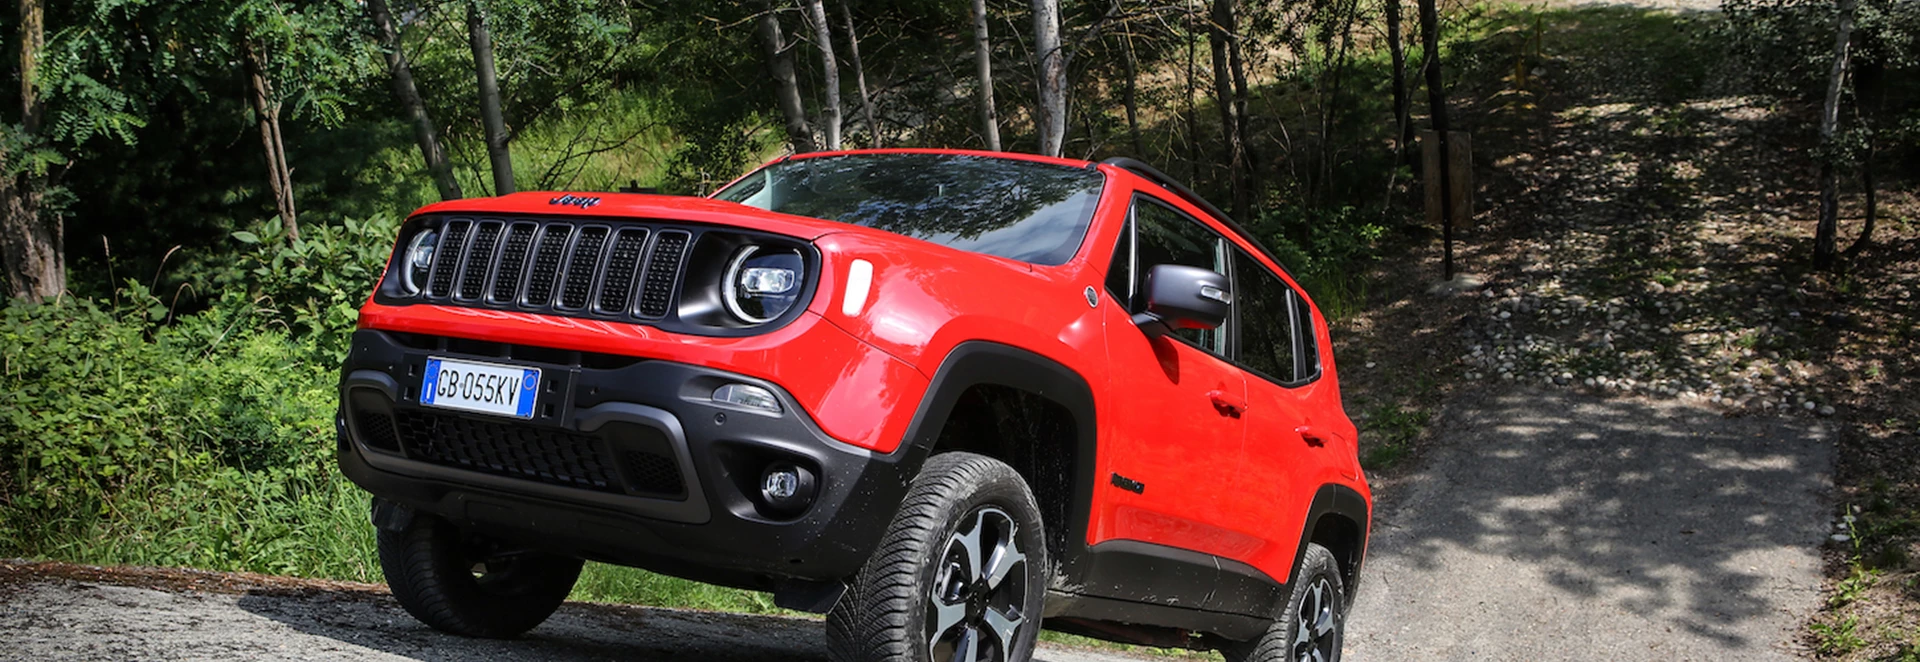 Jeep launches new Renegade 4xe plug-in hybrid as firm’s first electrified model 